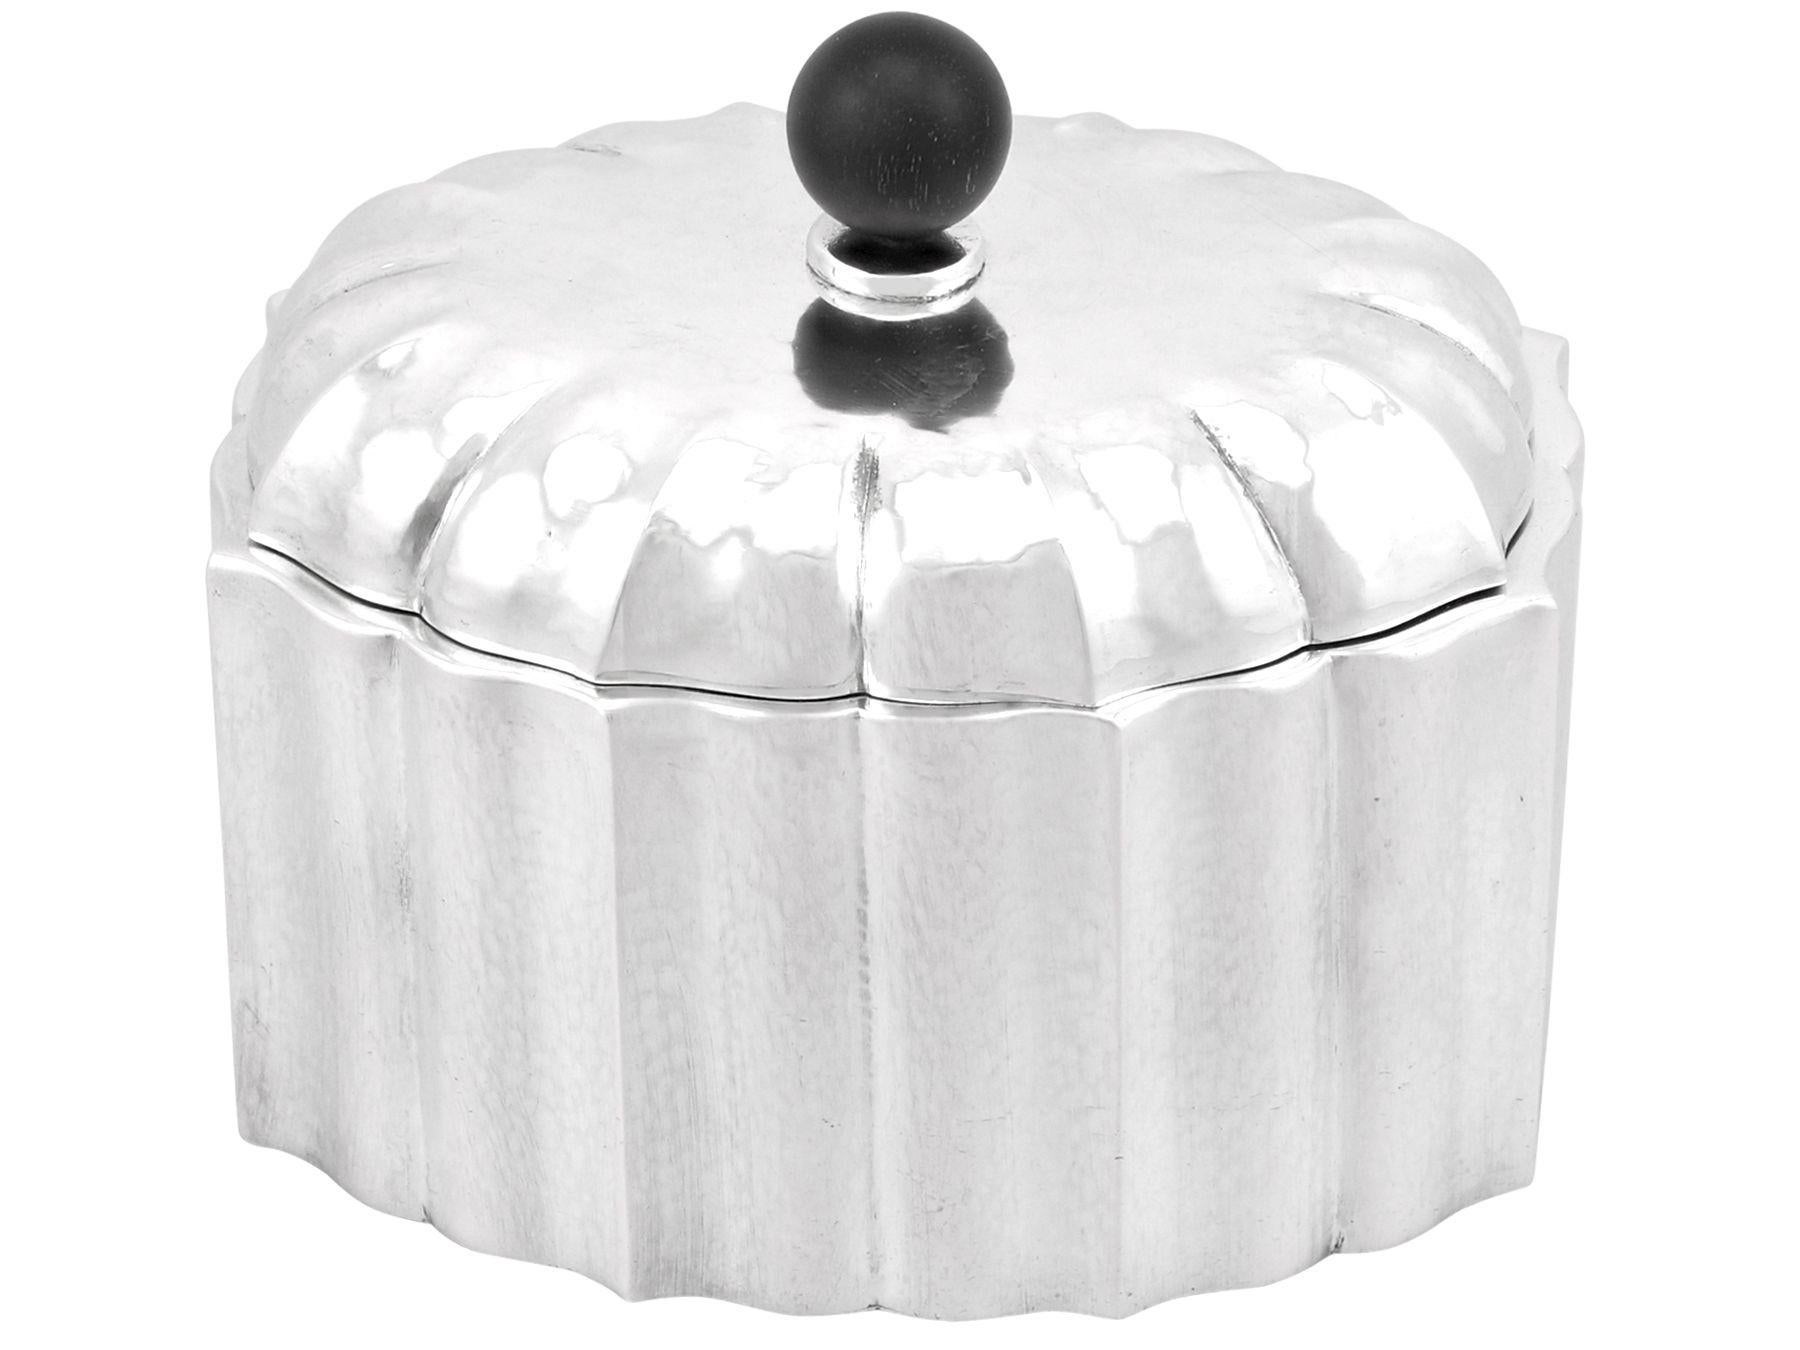 An exceptional, fine and impressive antique Austrian 800 standard silver tea caddy; an addition to our silver teaware collection.

This exceptional Austrian silver tea caddy has an oval shaped form.

The incurved panelled surface of this silver